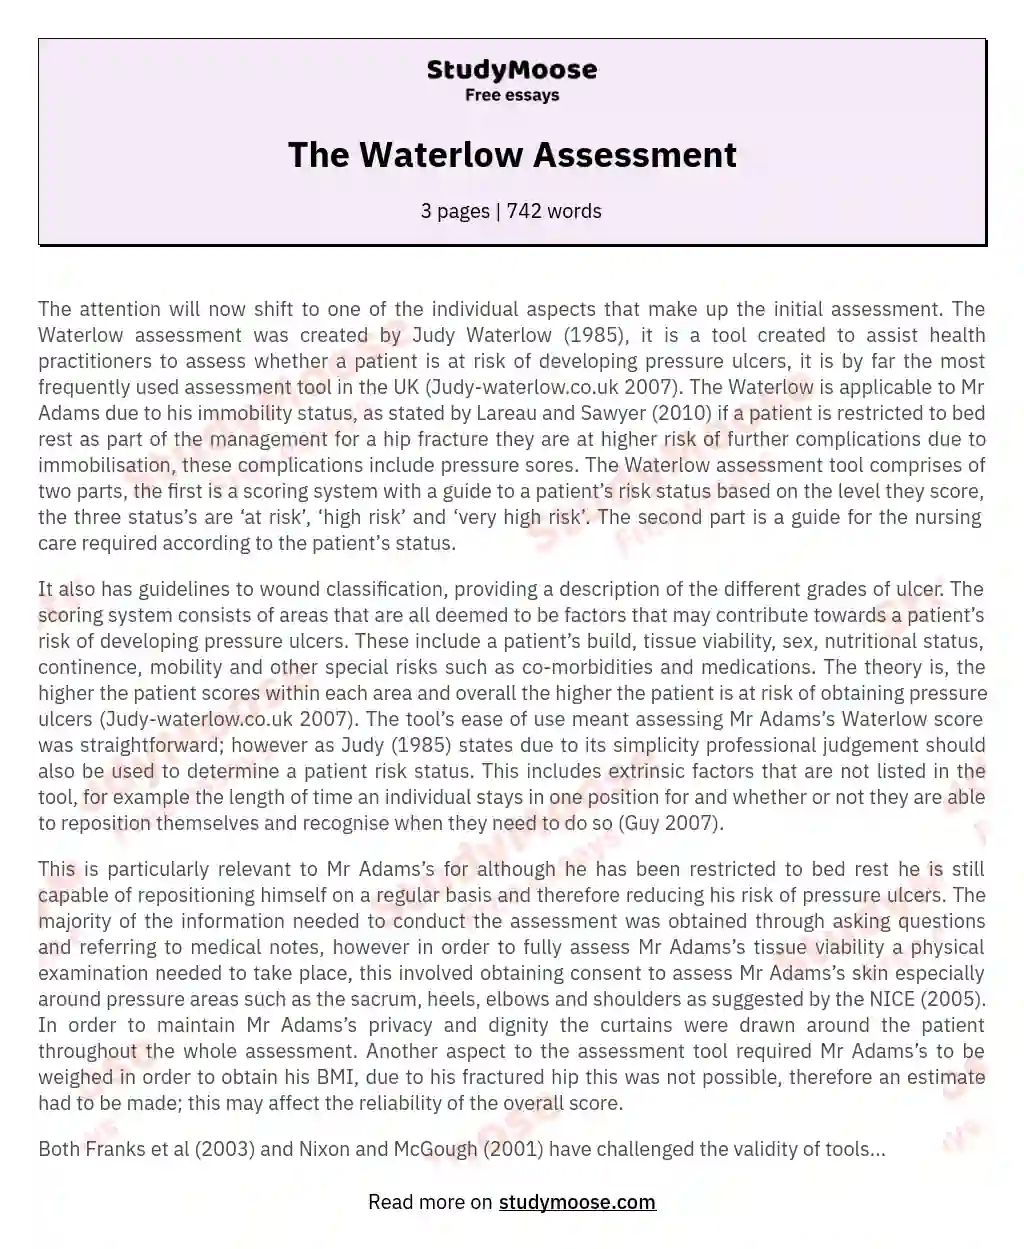 The Waterlow Assessment essay